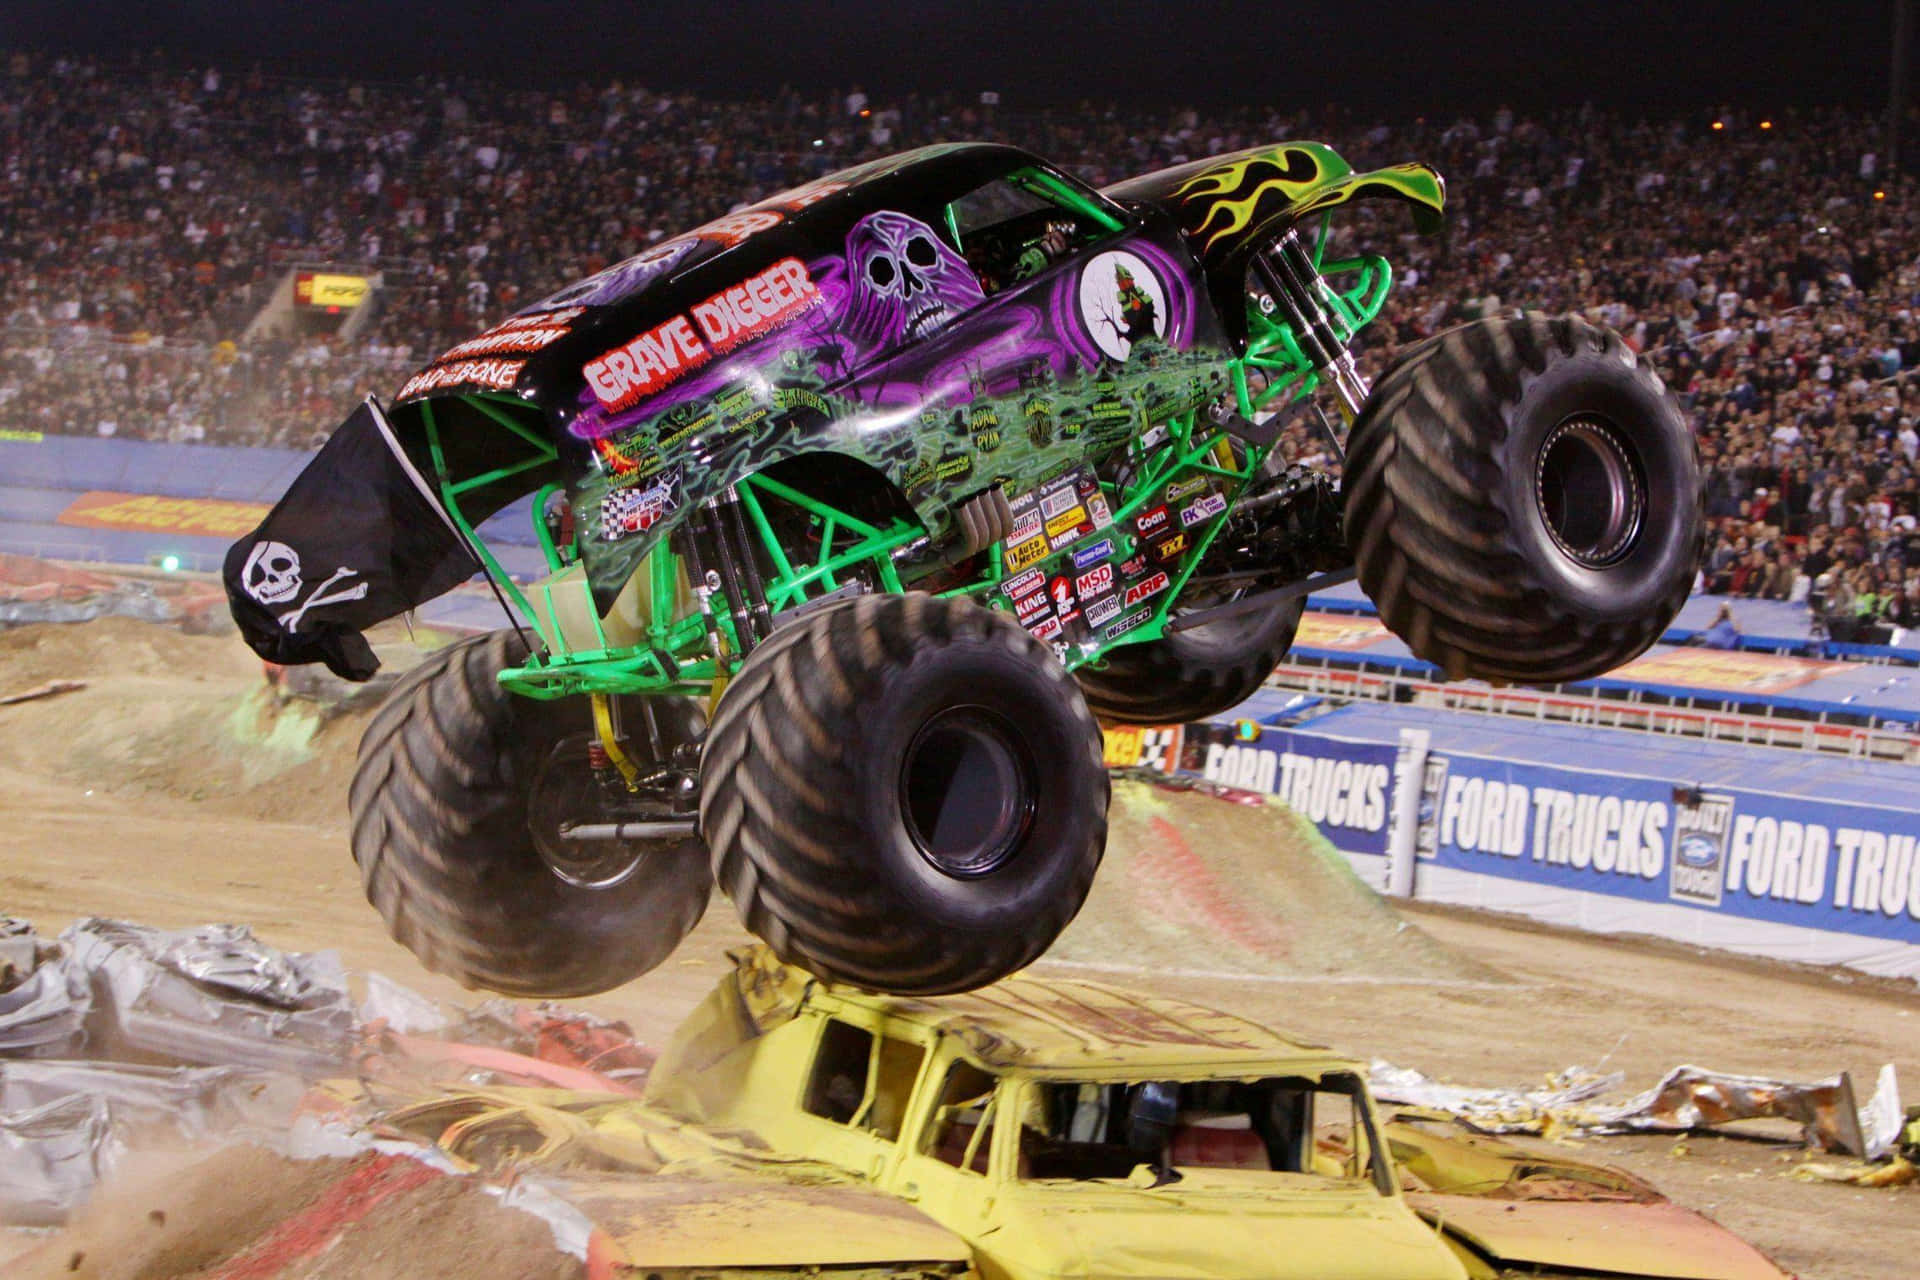 Get ready for an action-packed Monster Truck show!